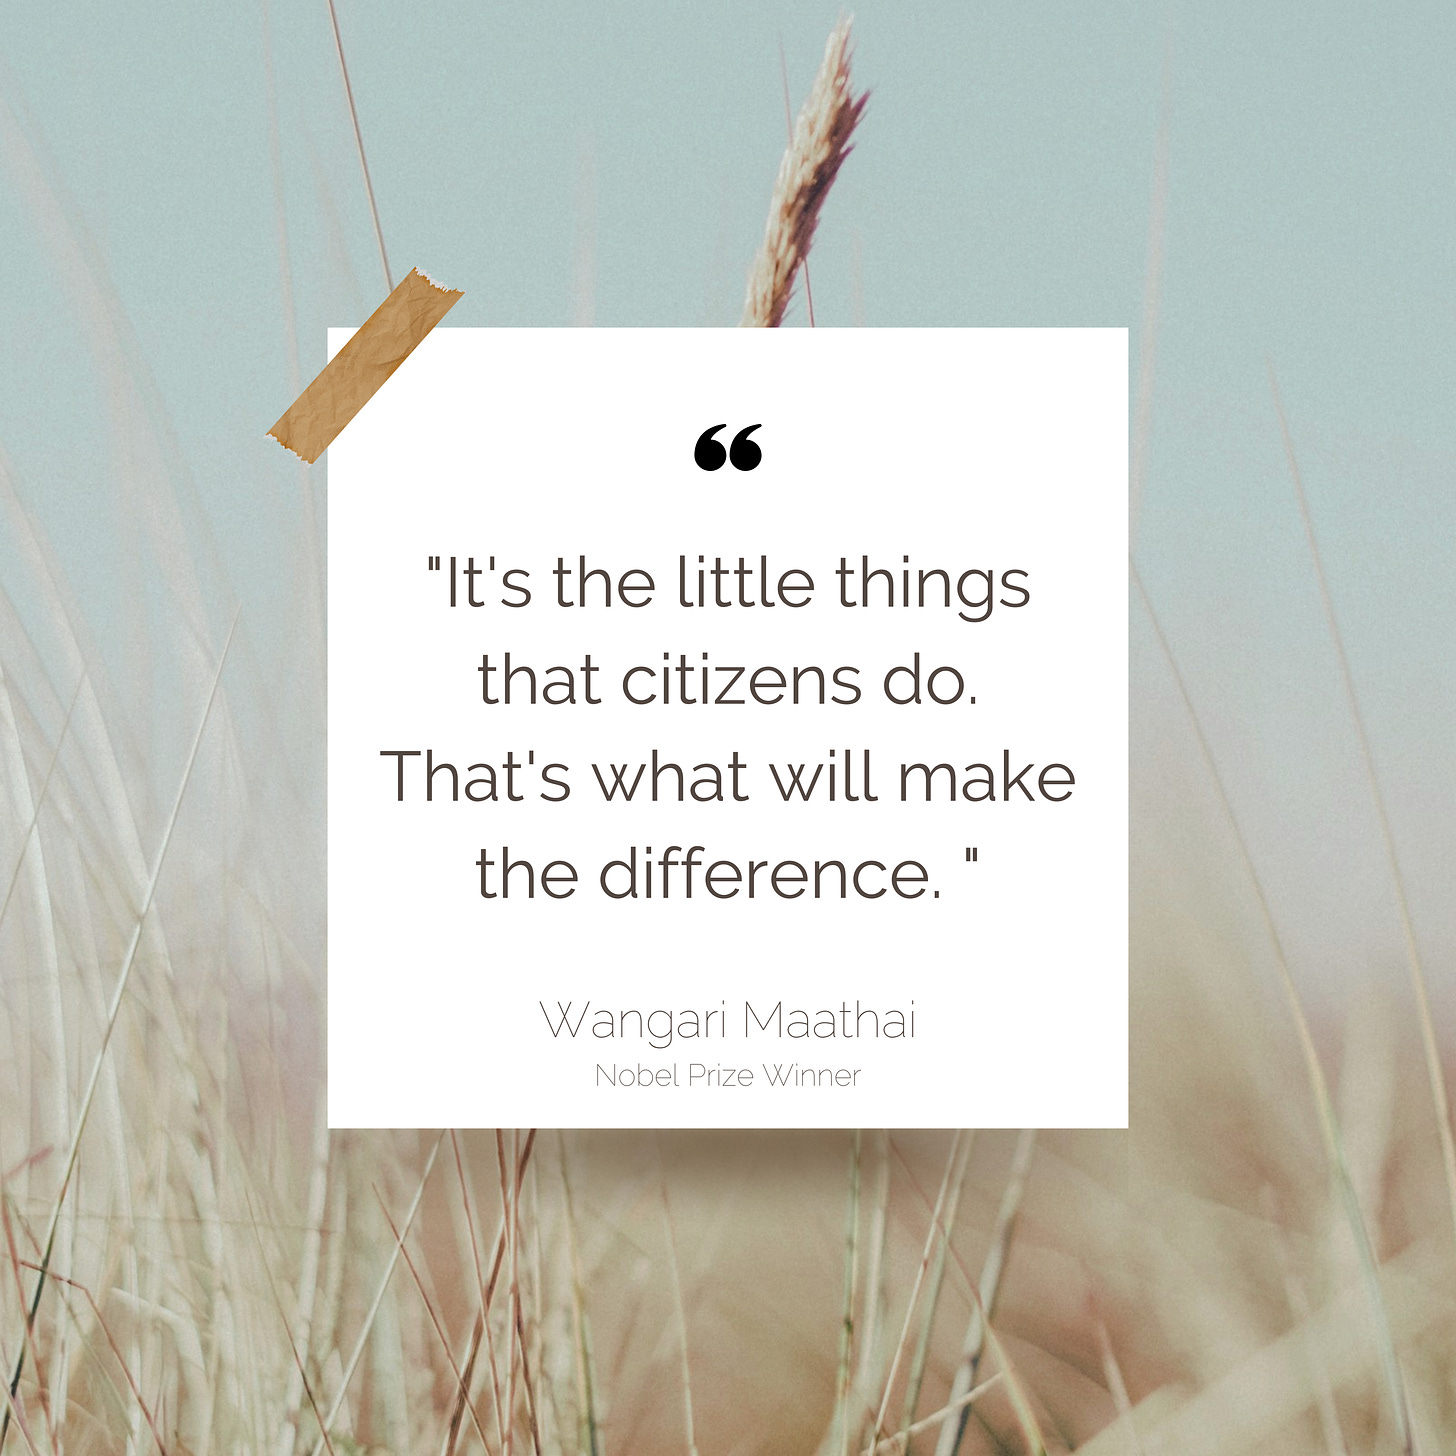 "It's the little things that citizens do. That's what will make the difference. My little thing is planting trees.” - Wangari Maathai